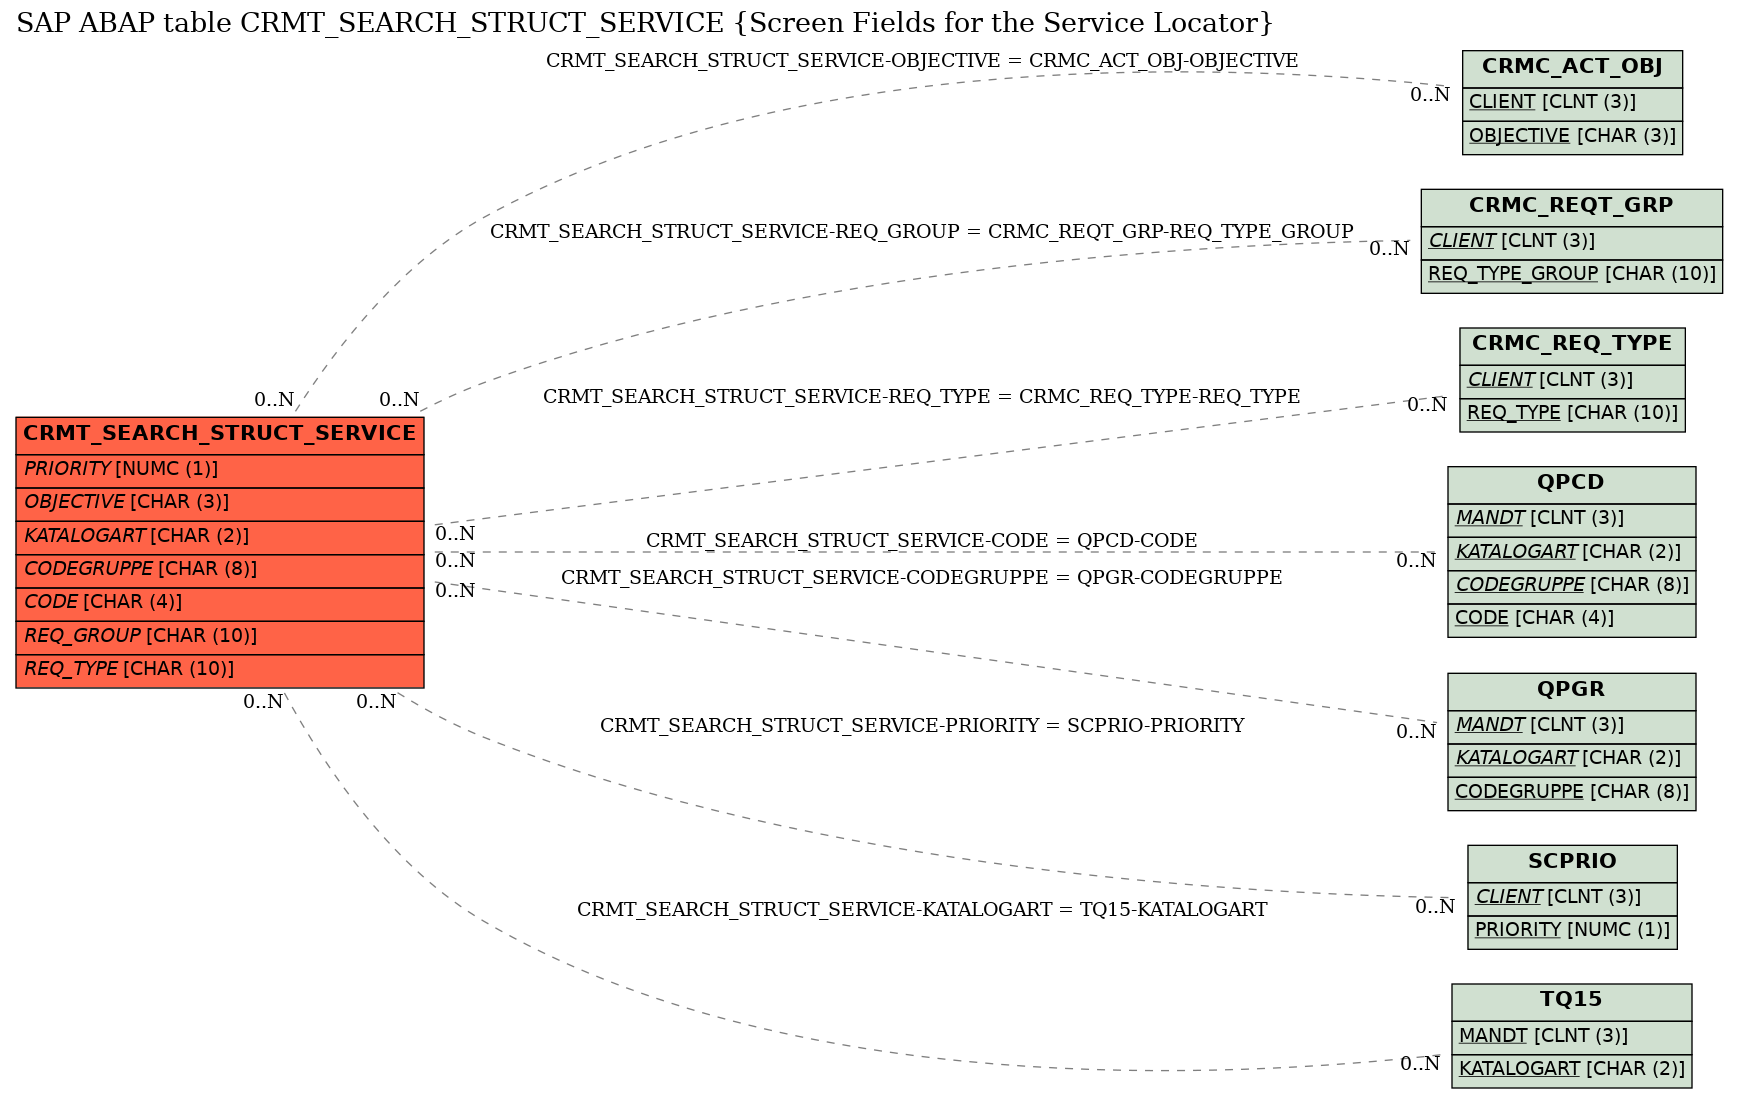 E-R Diagram for table CRMT_SEARCH_STRUCT_SERVICE (Screen Fields for the Service Locator)